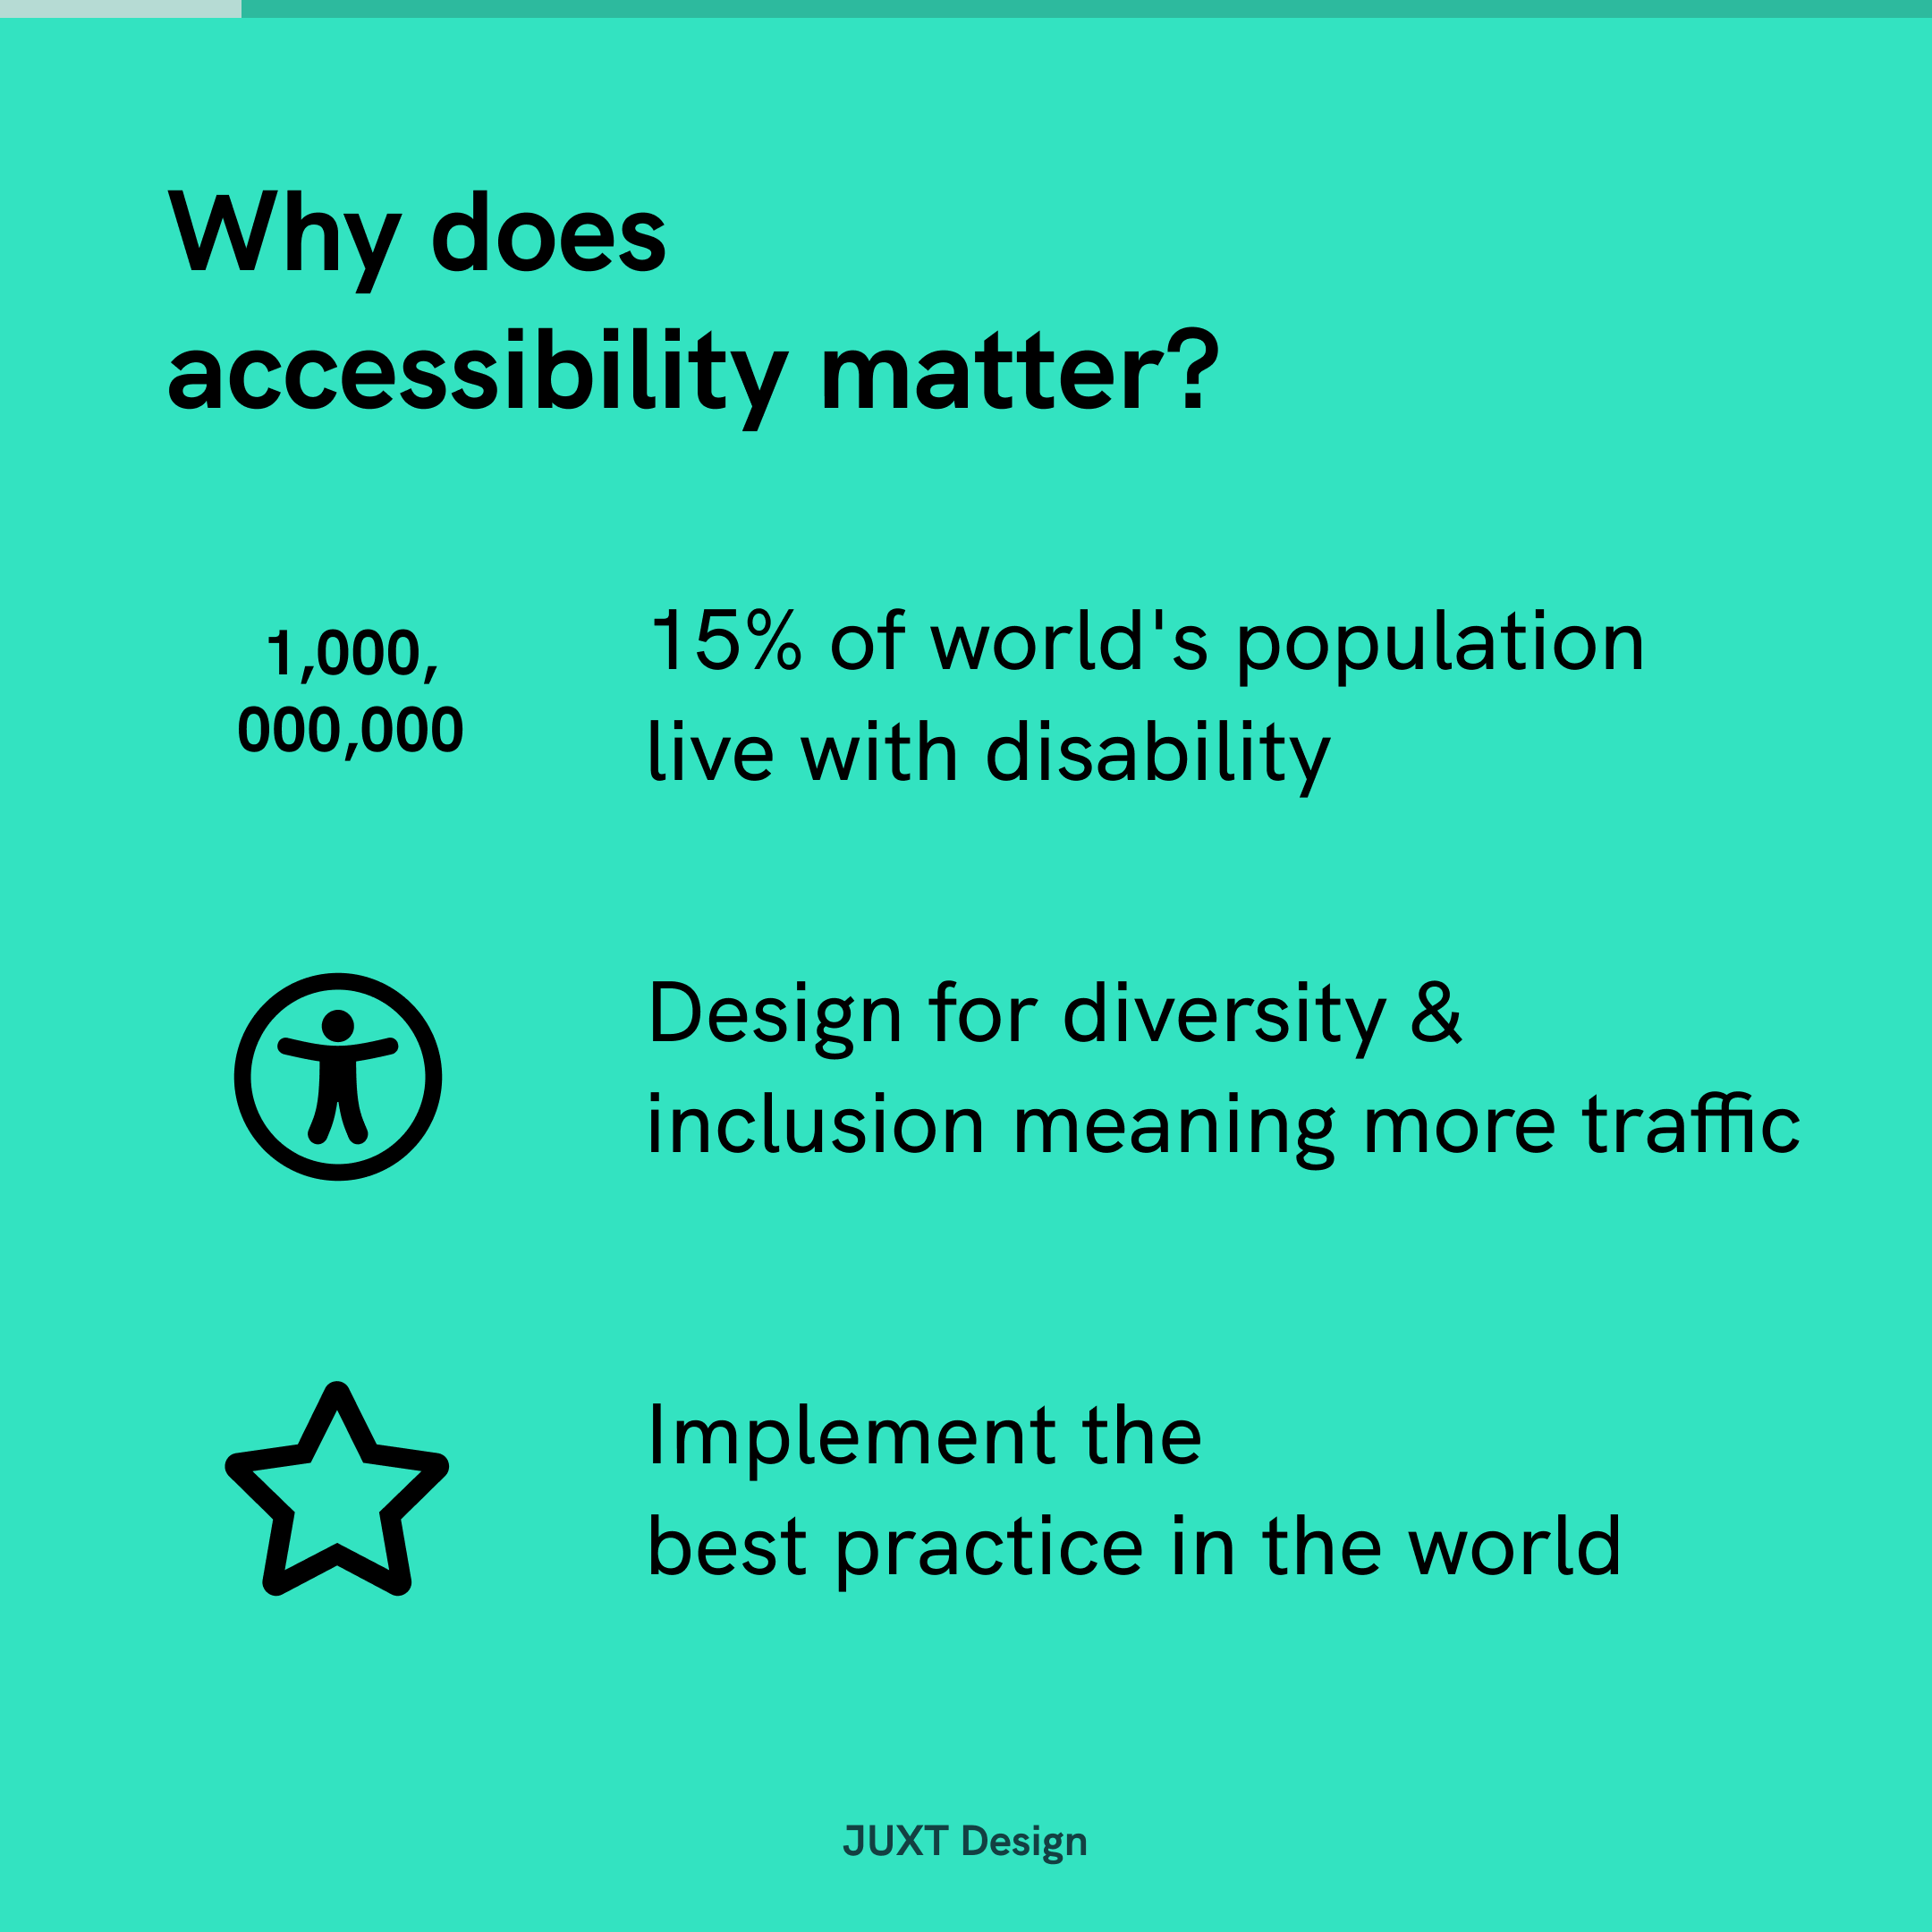 Why does accessibility matter? 15% of world's population live with disability, Design for diversity & inclusion meaning more traffic, Implement the best practice in the world